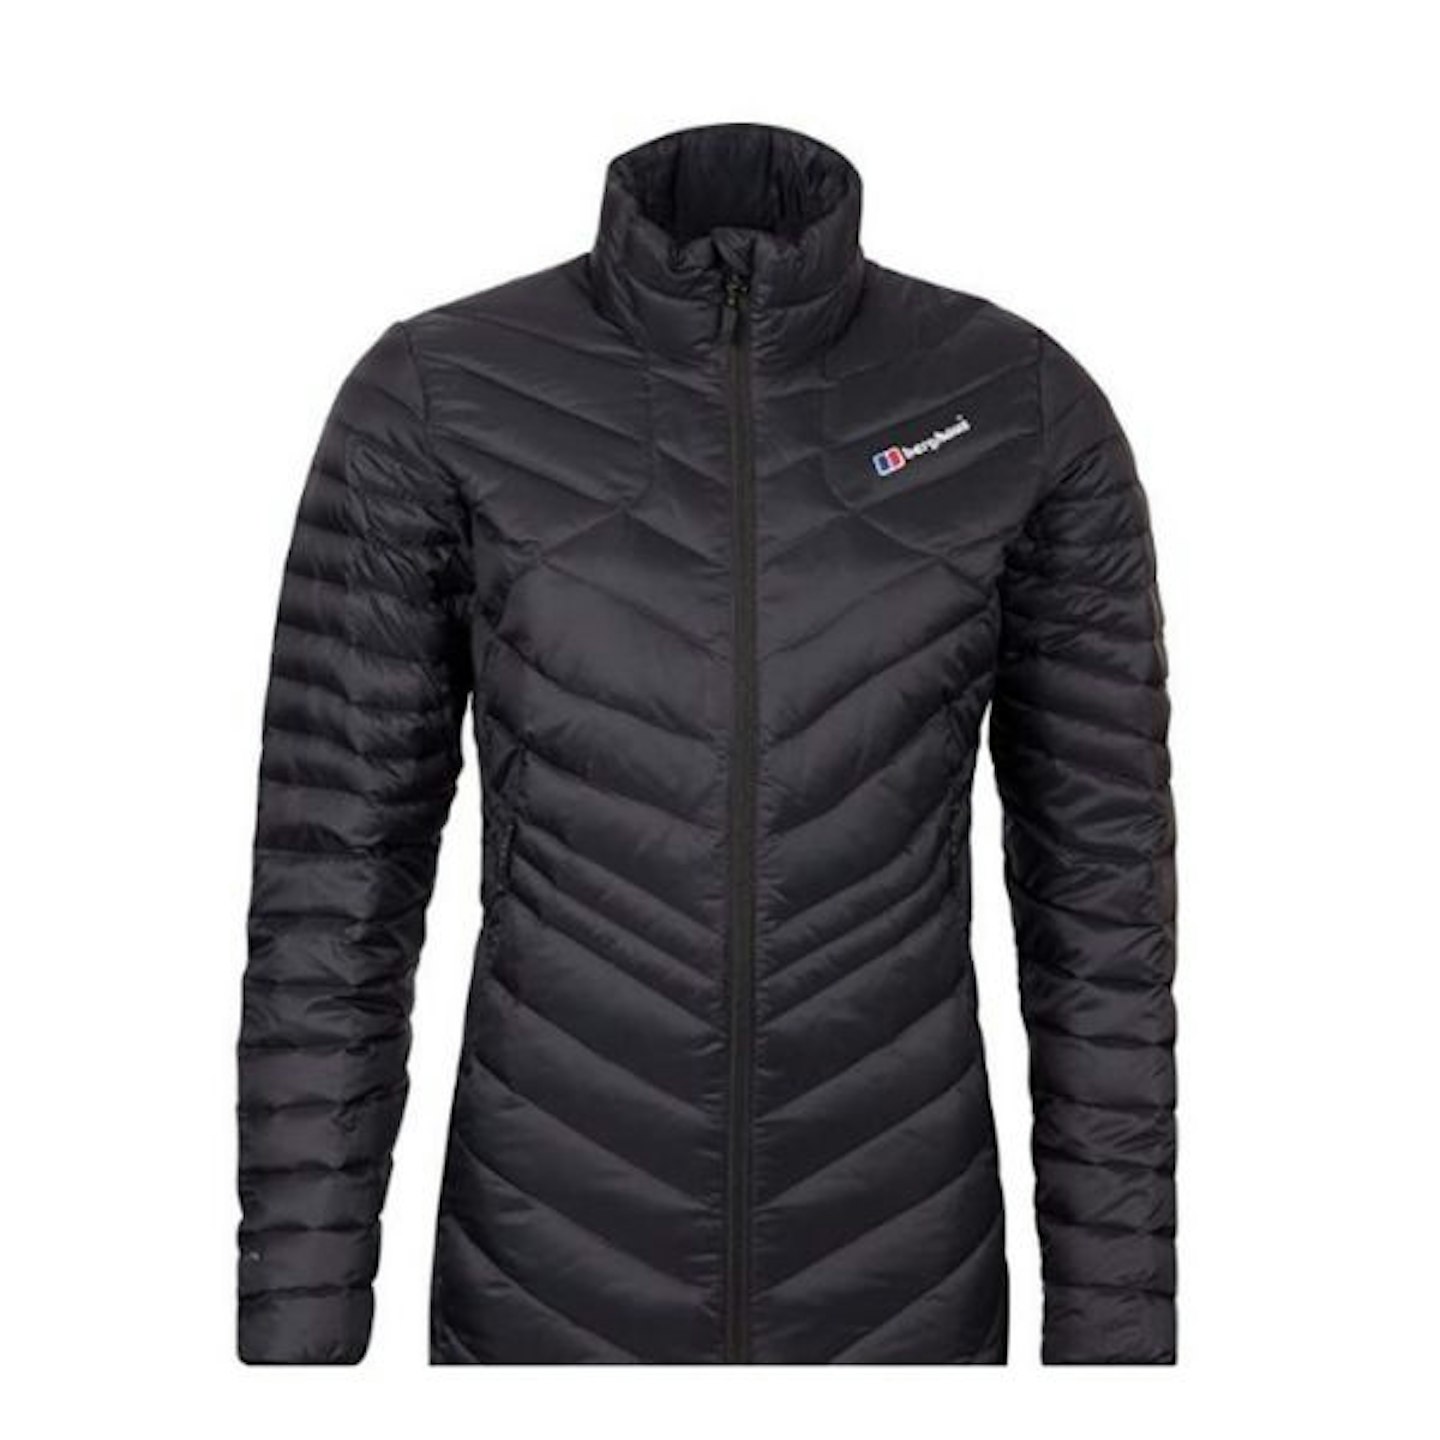 Berghaus Women's Tephra Reflect Down Insulated Jacket